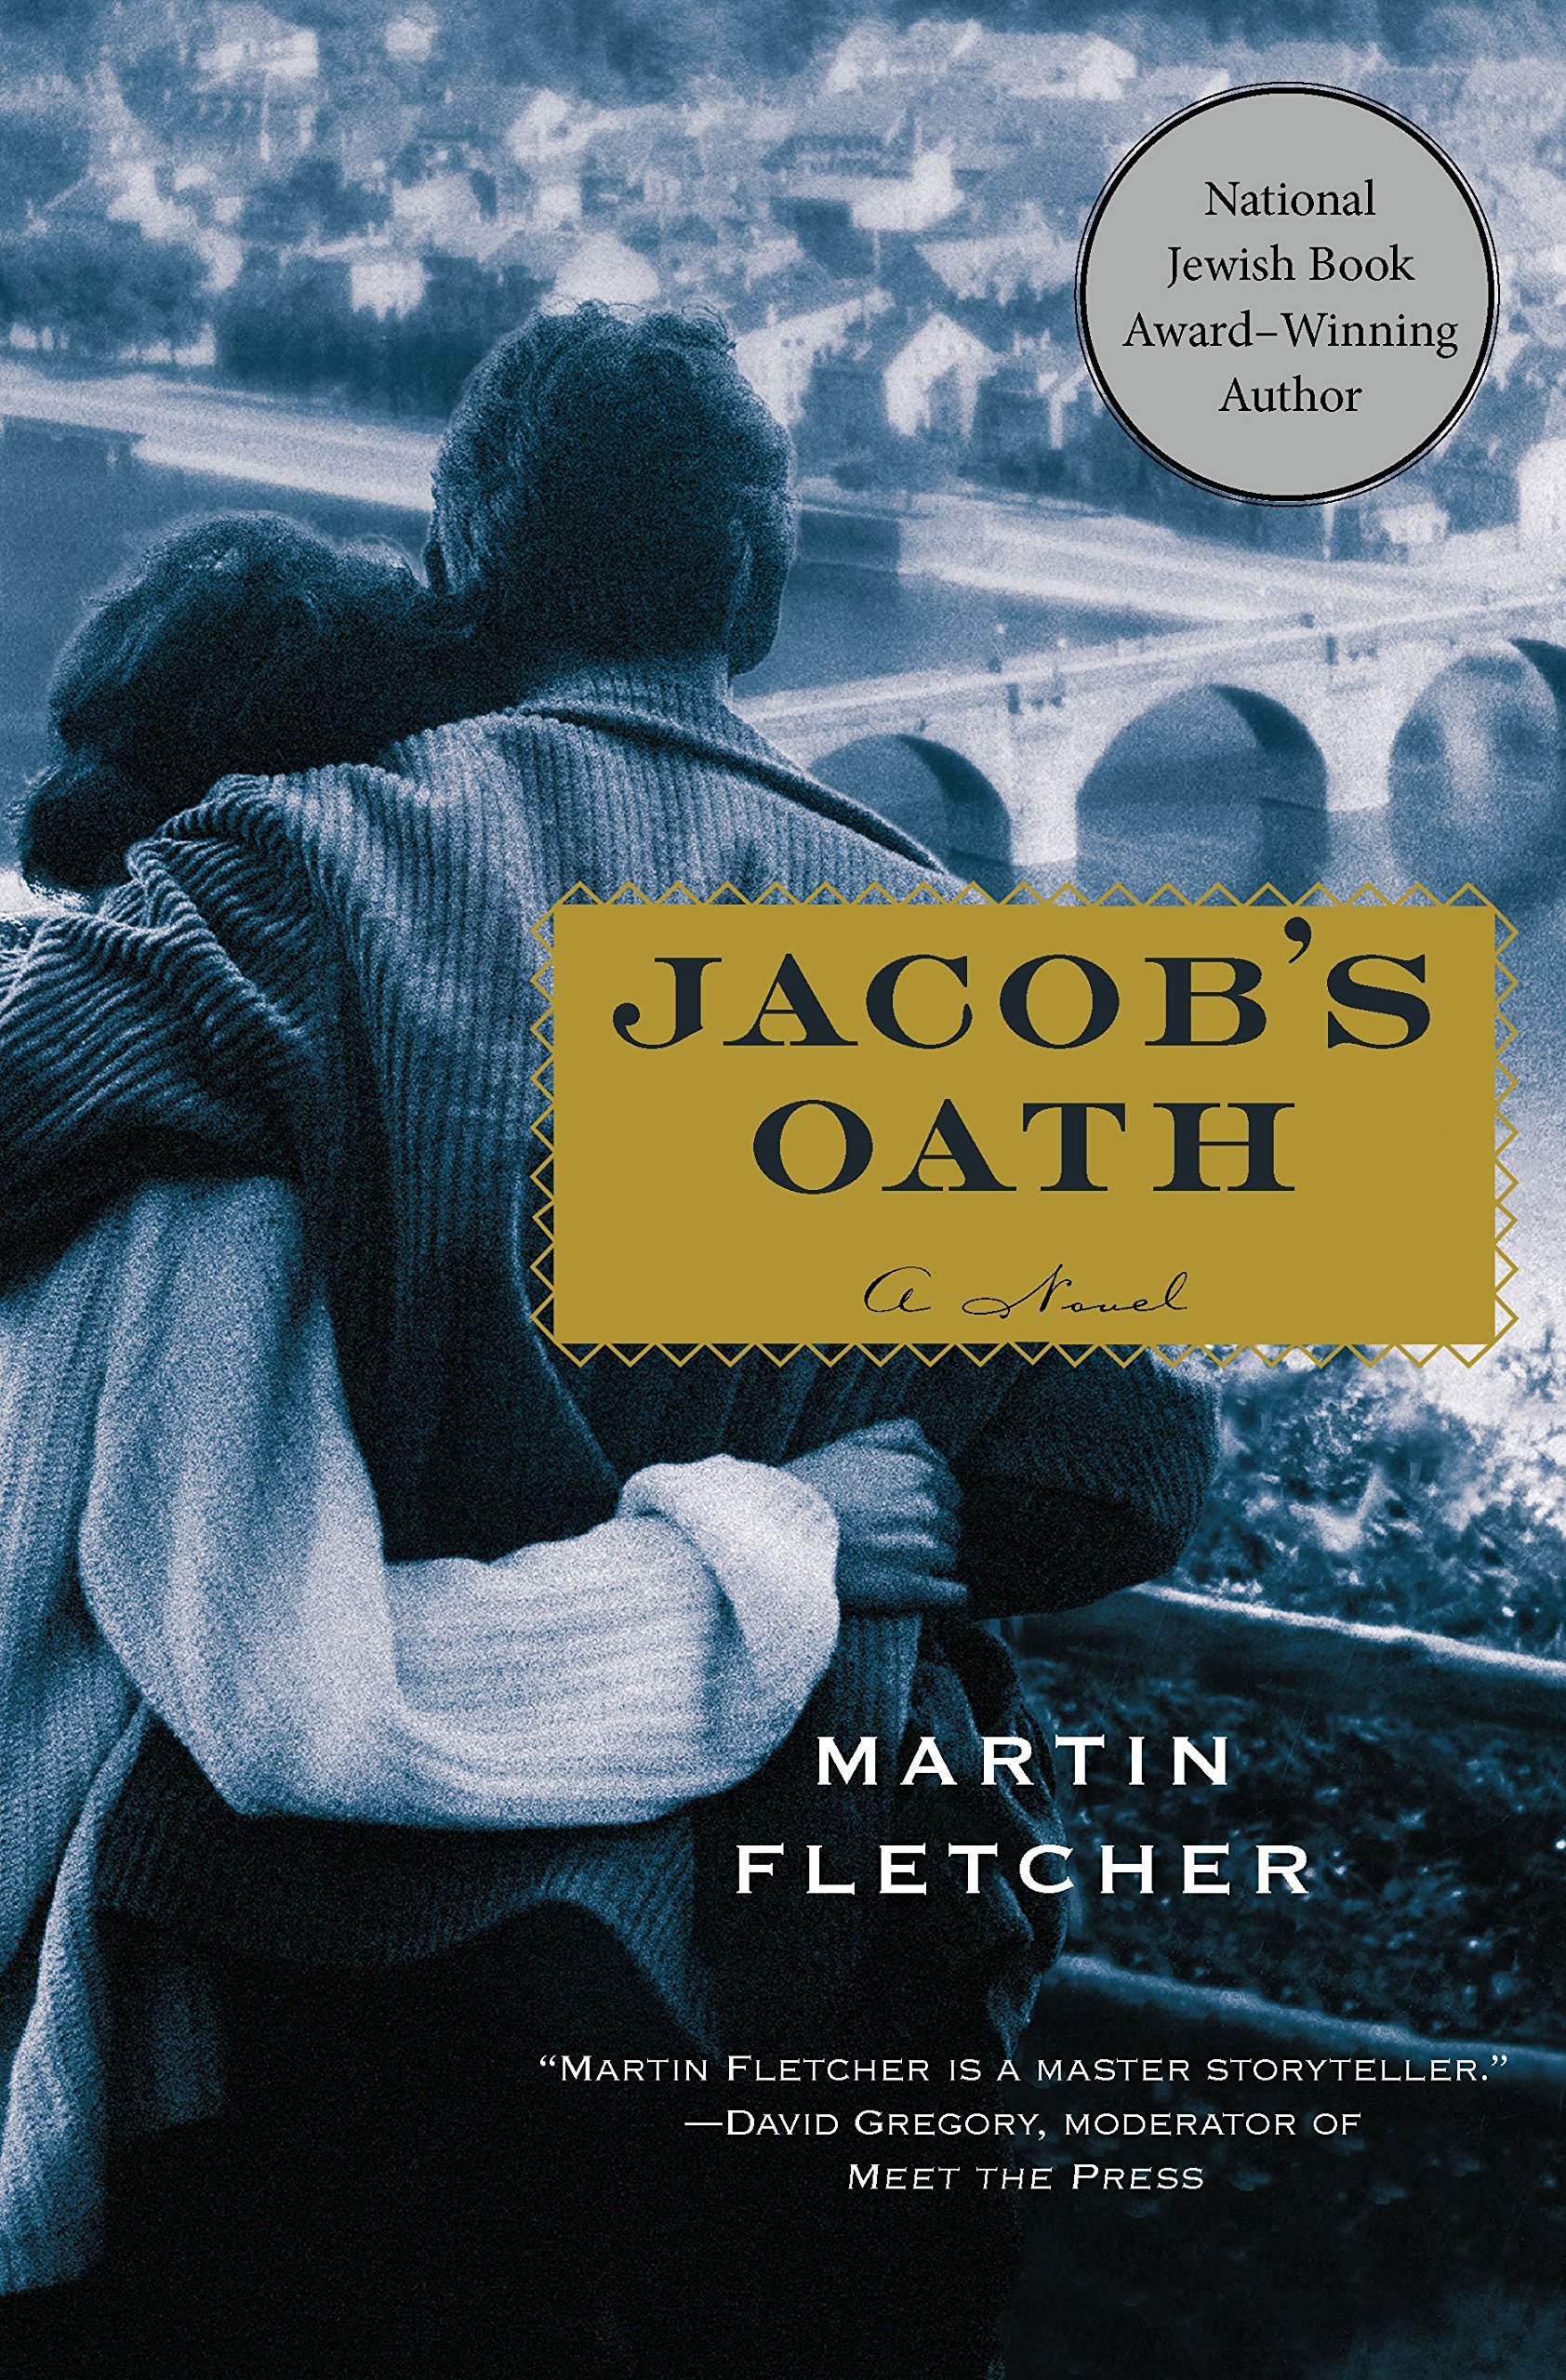 Image for "Jacob's Oath"